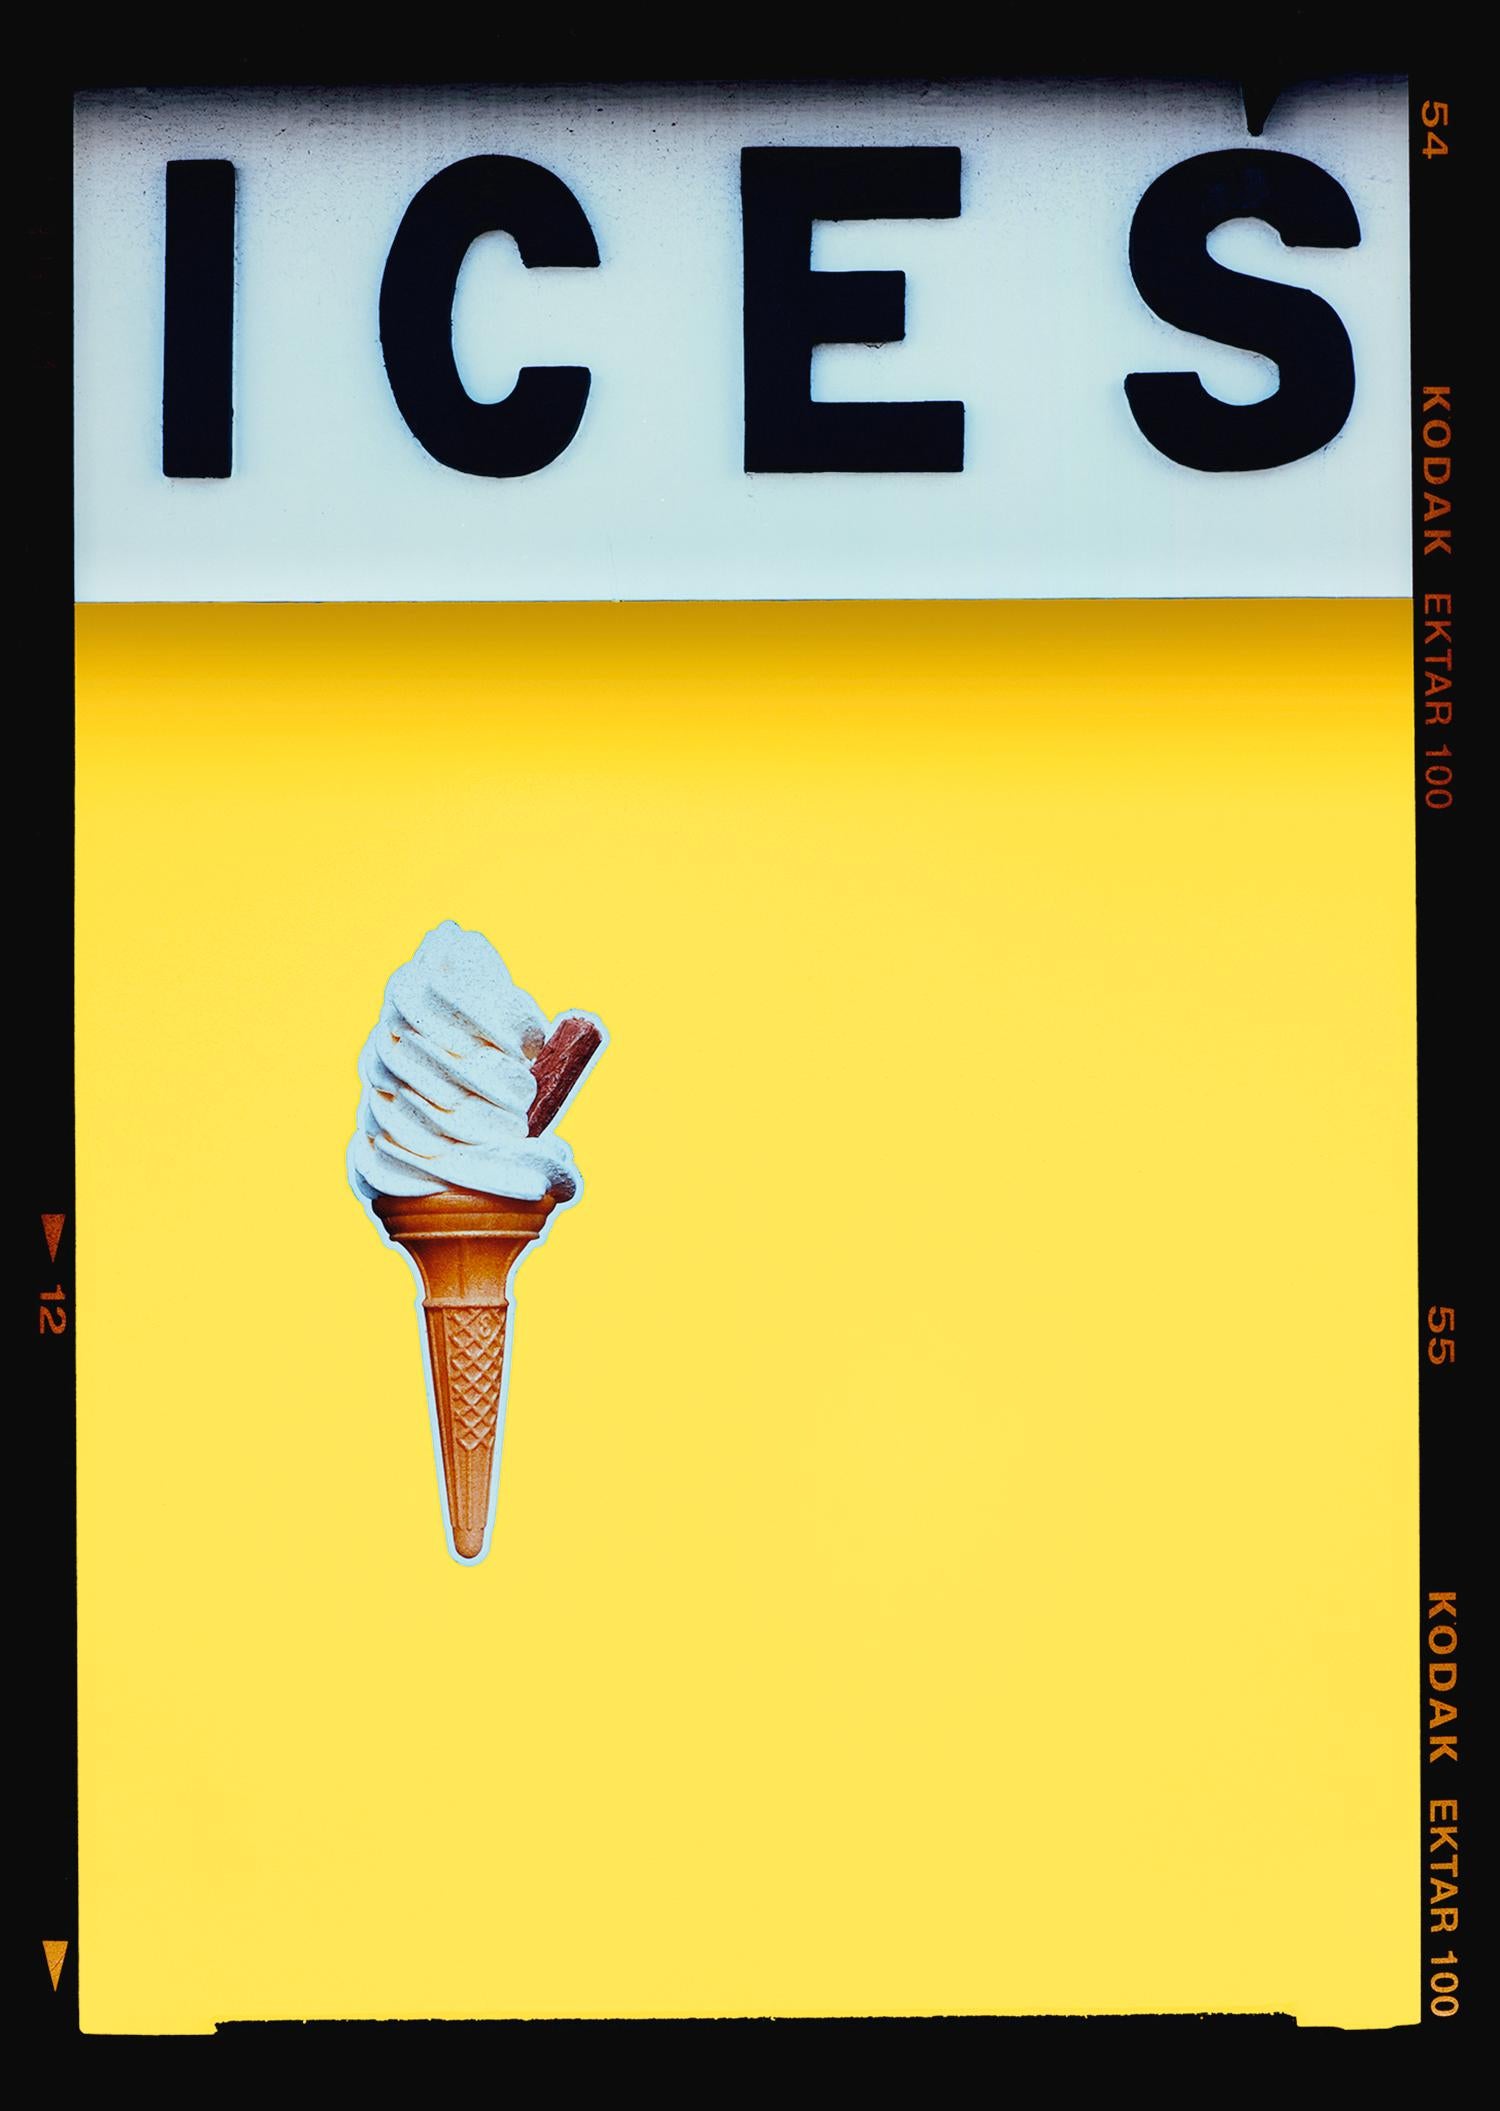 ICES Lilac Purple and Sherbet Yellow, bold colour blocking pop art street photography from Richard Heeps series, On-Sea.
Created as an ode to childhood visits to grandparents living on the Sussex coast, the artwork tells the story of the simple joys